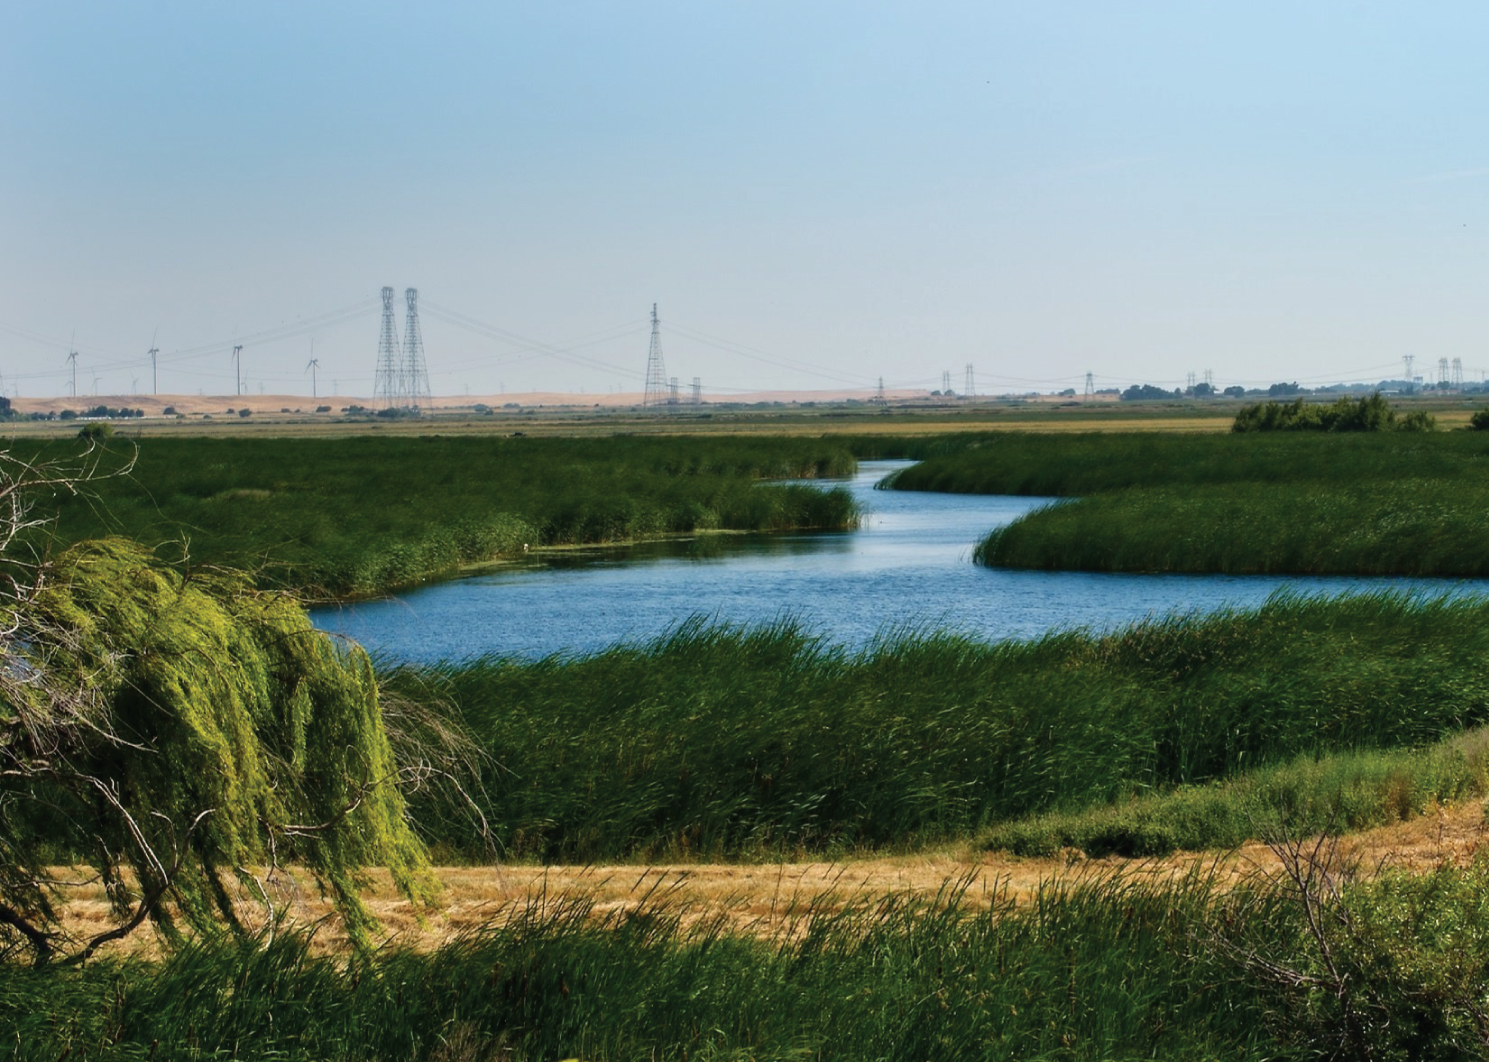 A photograph of a meandering river surrounded by marsh grasses, with transmission towers, powerlines, and wind turbines in the distance.